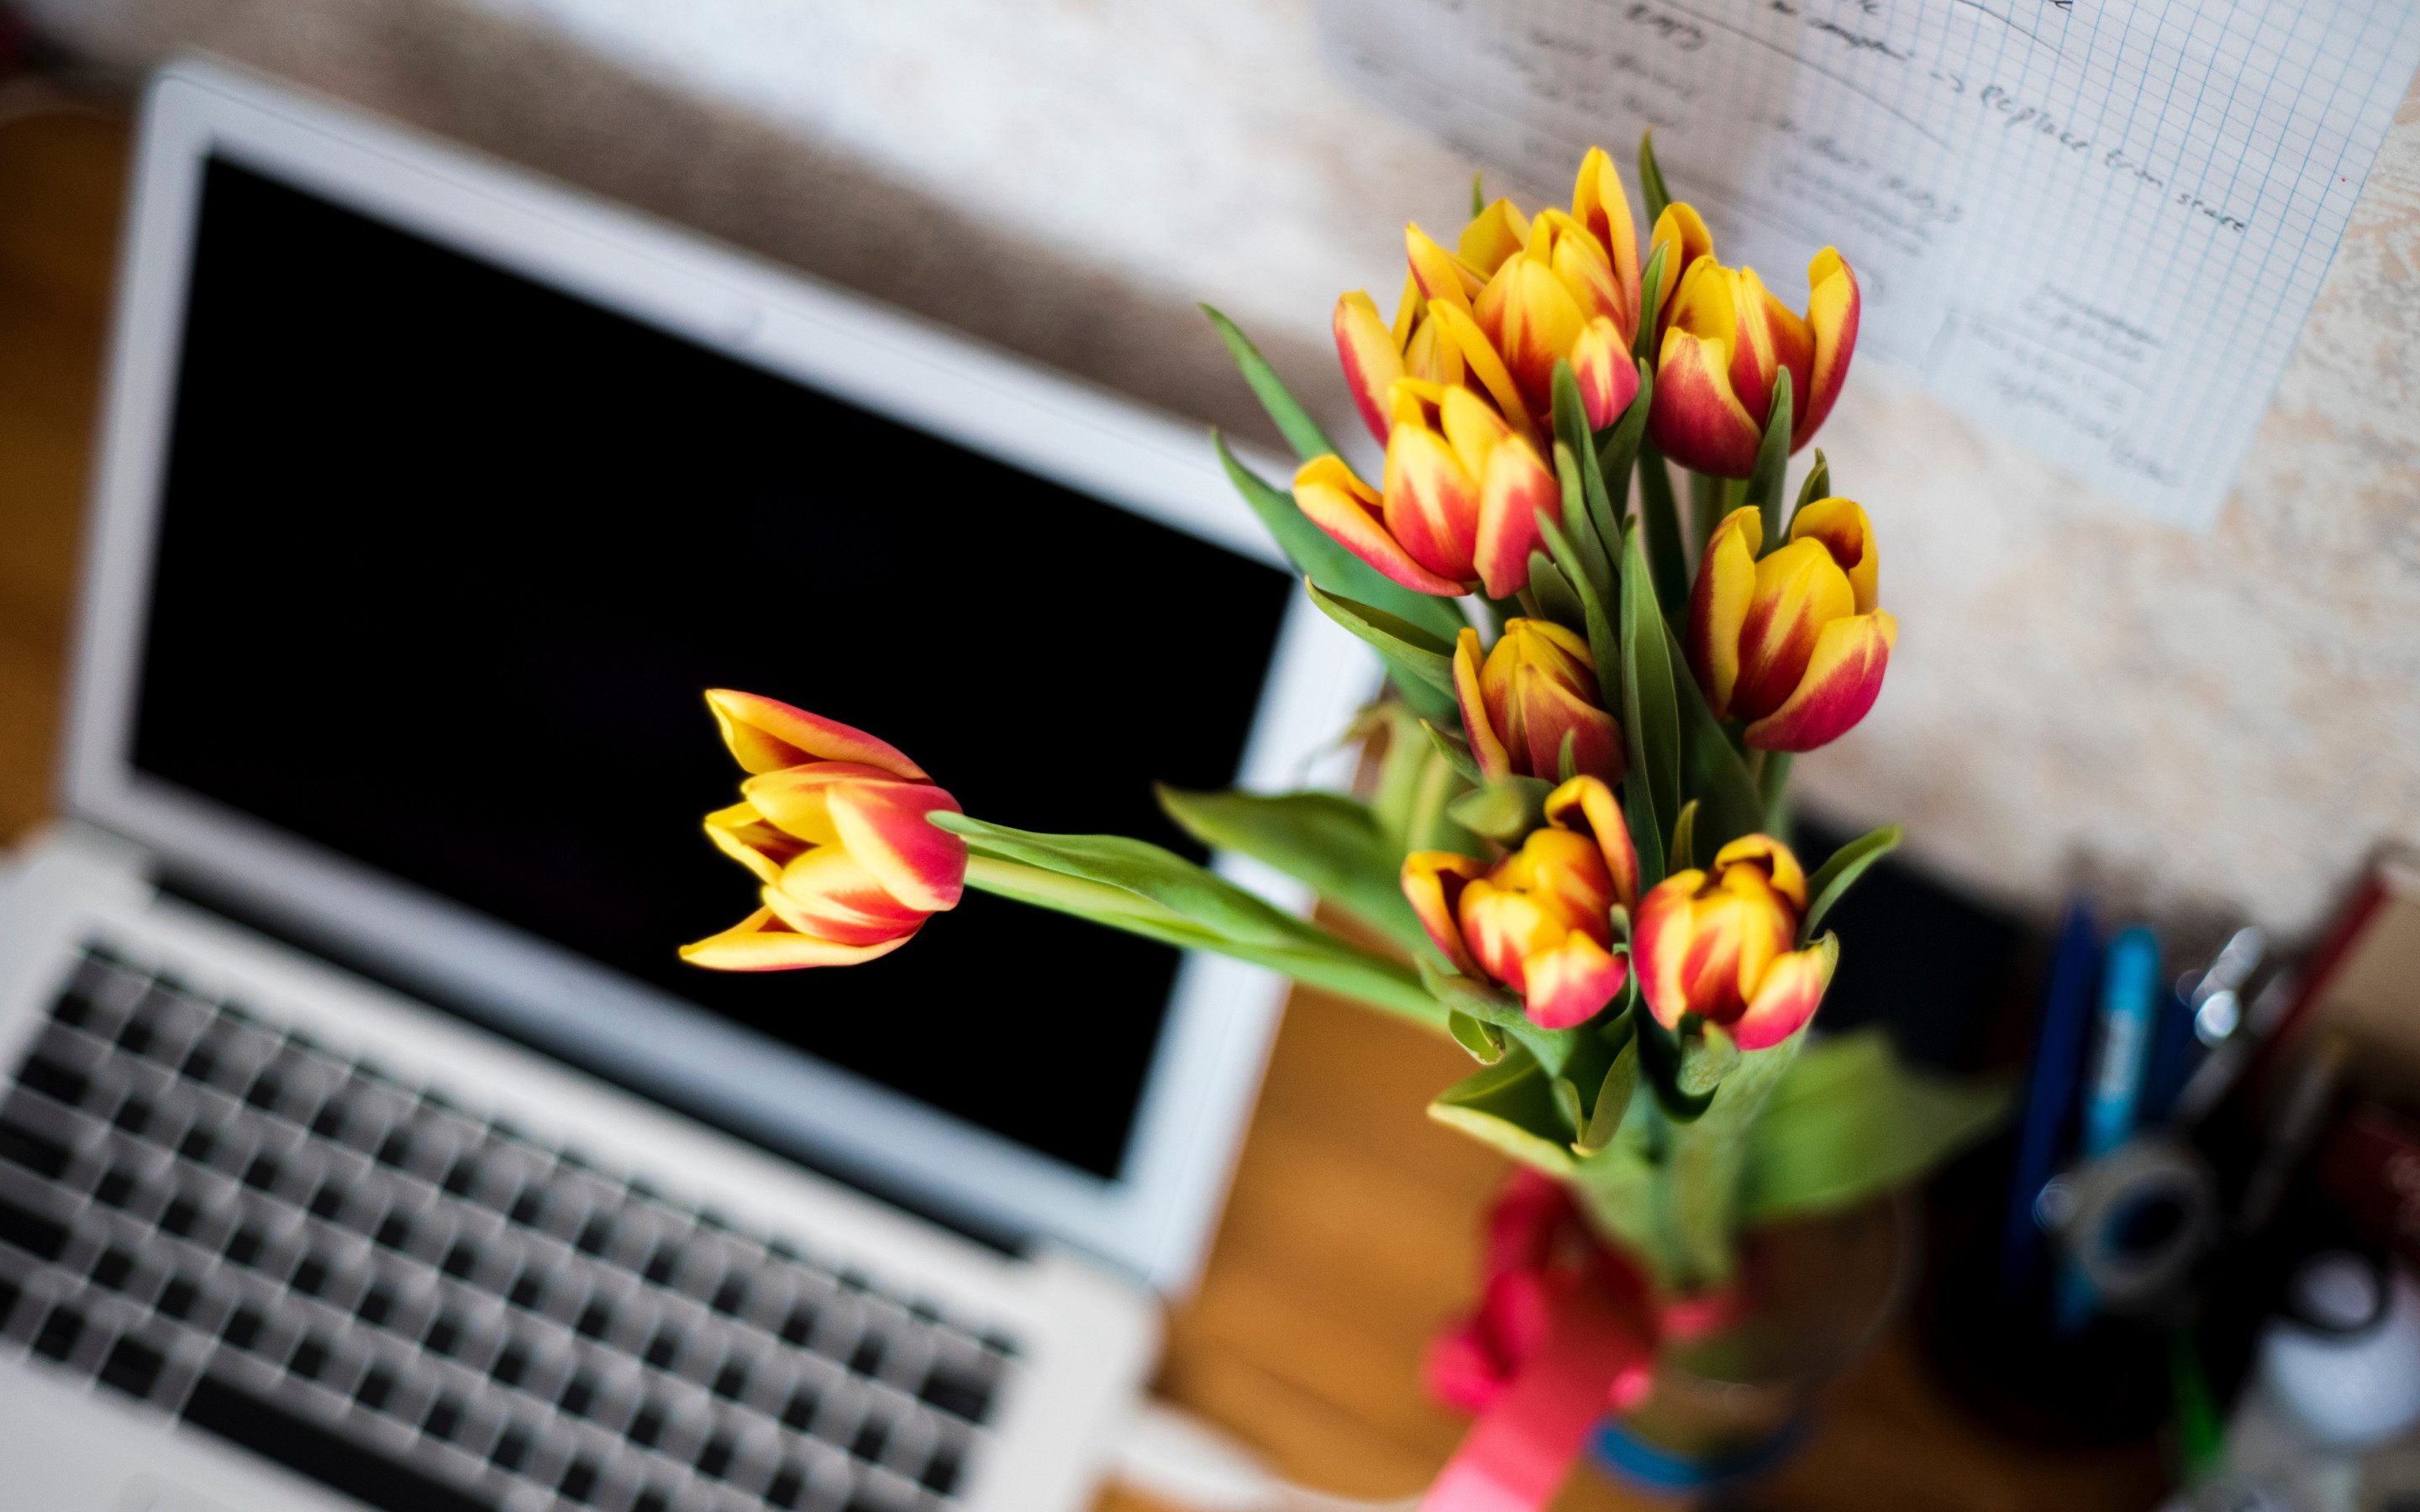 Laptop and tulips bouquet wallpaper 2880x1800